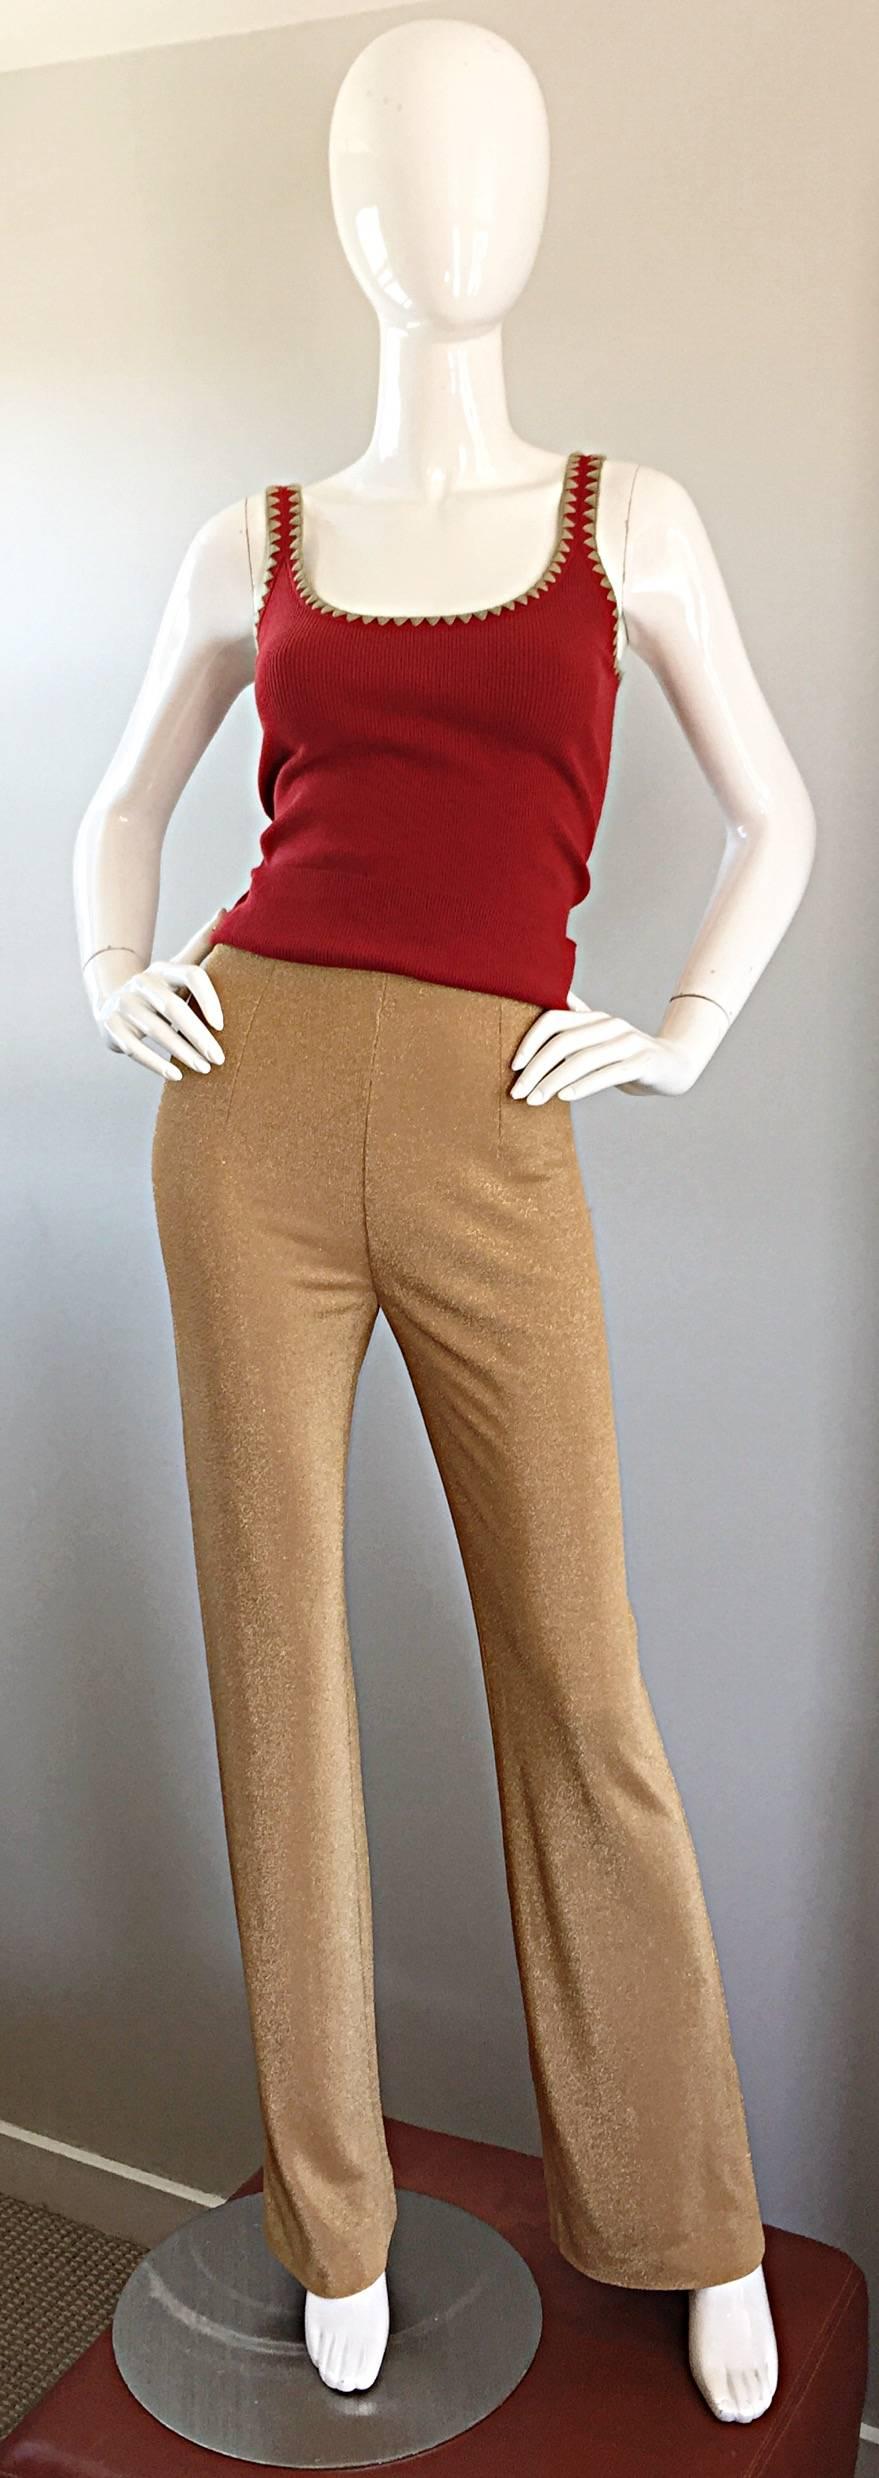 Michael Kors Collection Brick Red + Tan 1990s 90s Ribbed Crop Top 2